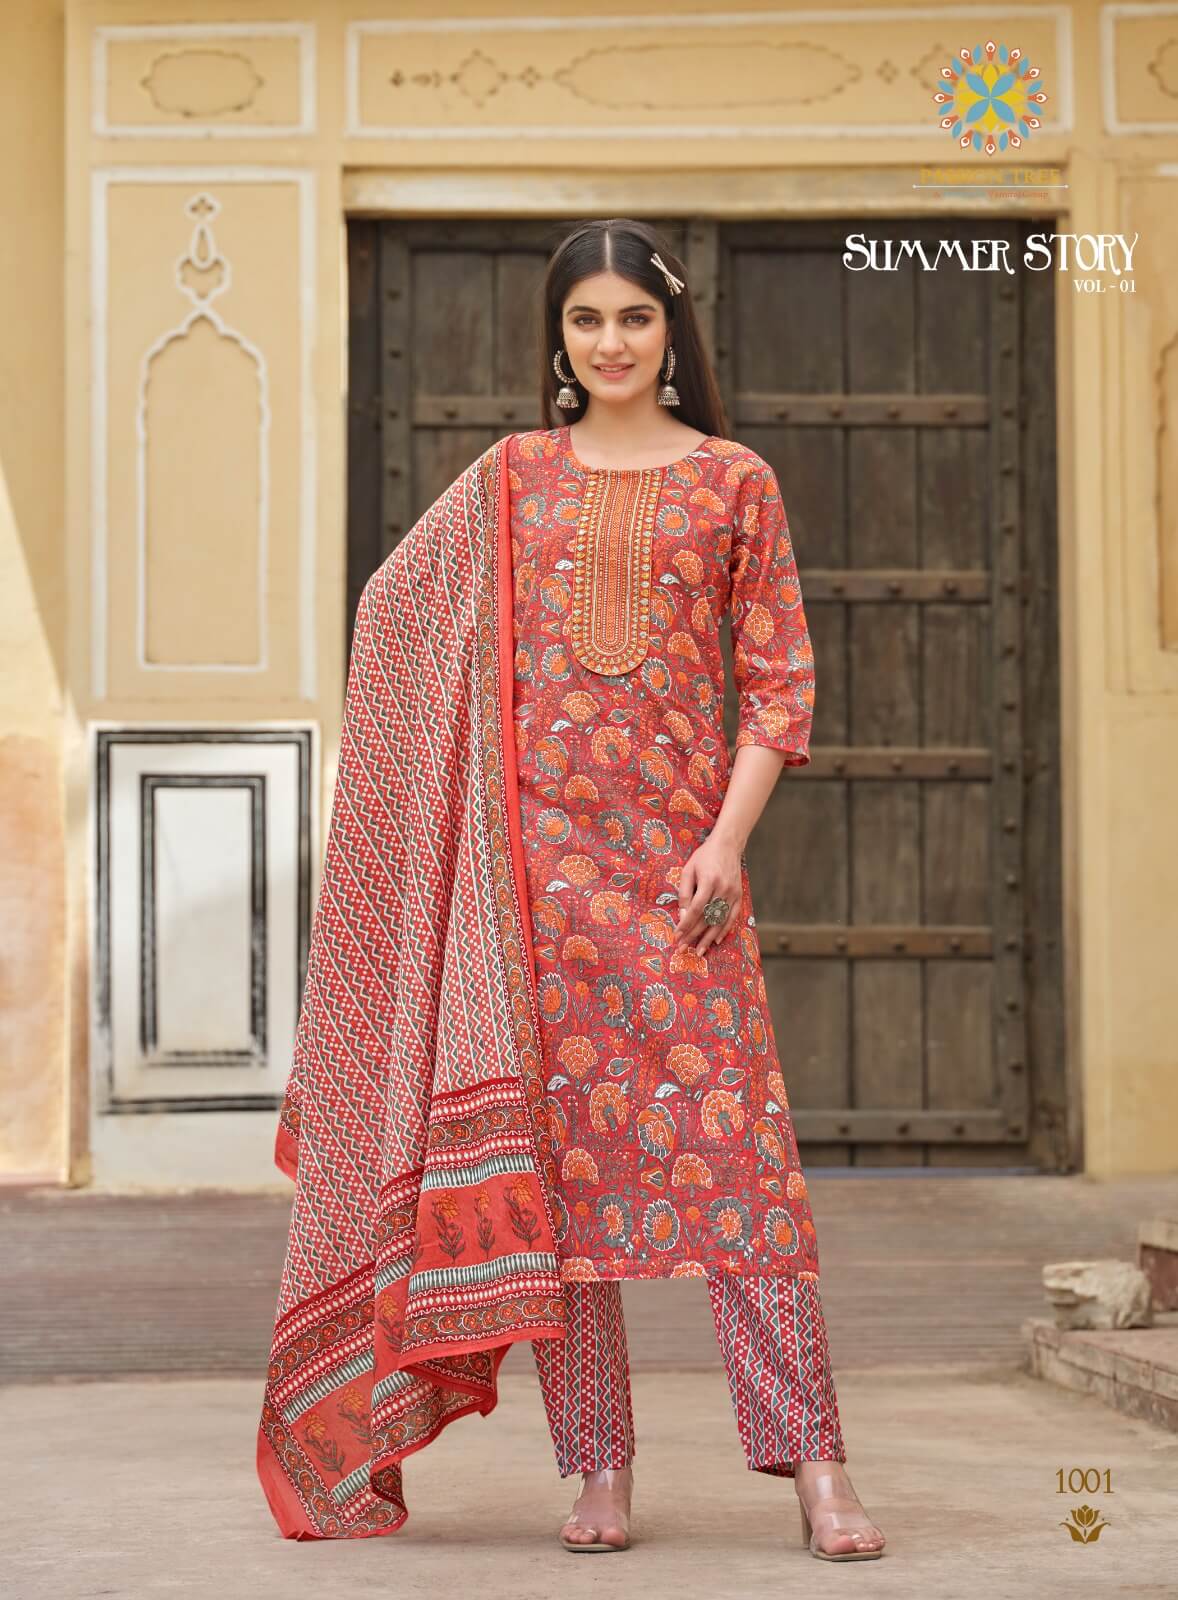 Passion Tree Summer Story vol 1 Printed Salwar Kameez collection 7